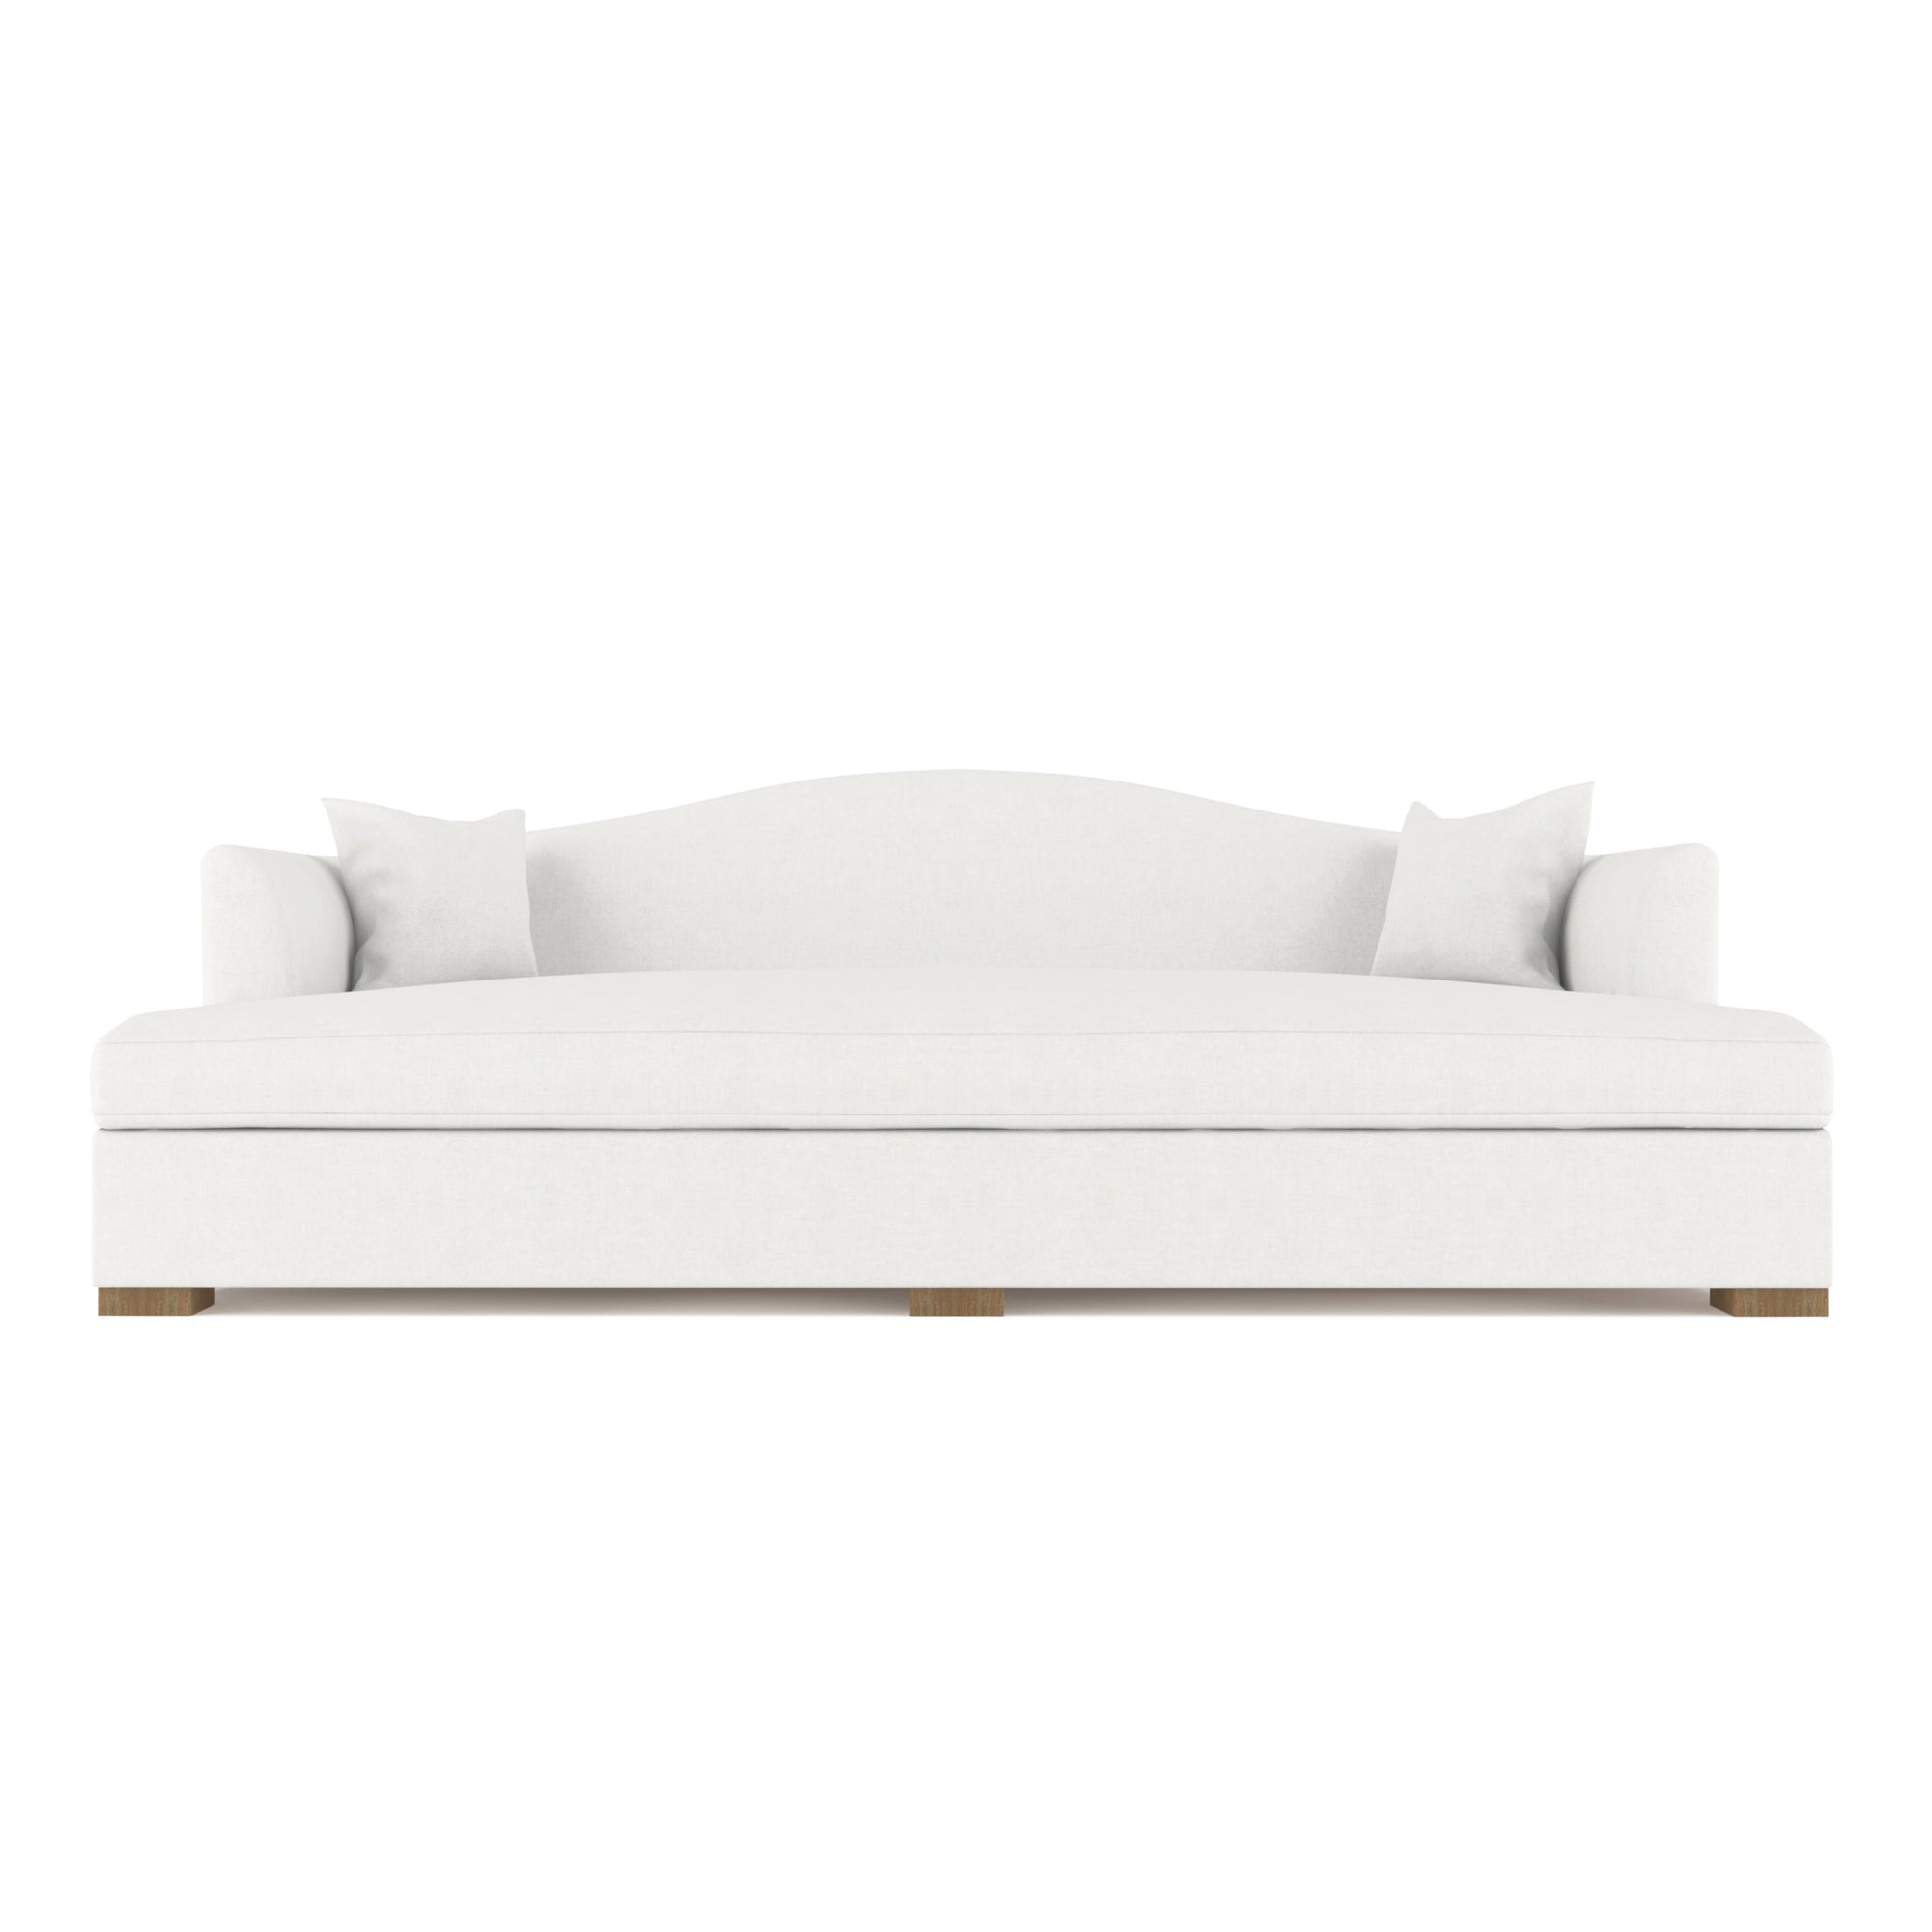 Horatio Daybed - Blanc Box Weave Linen